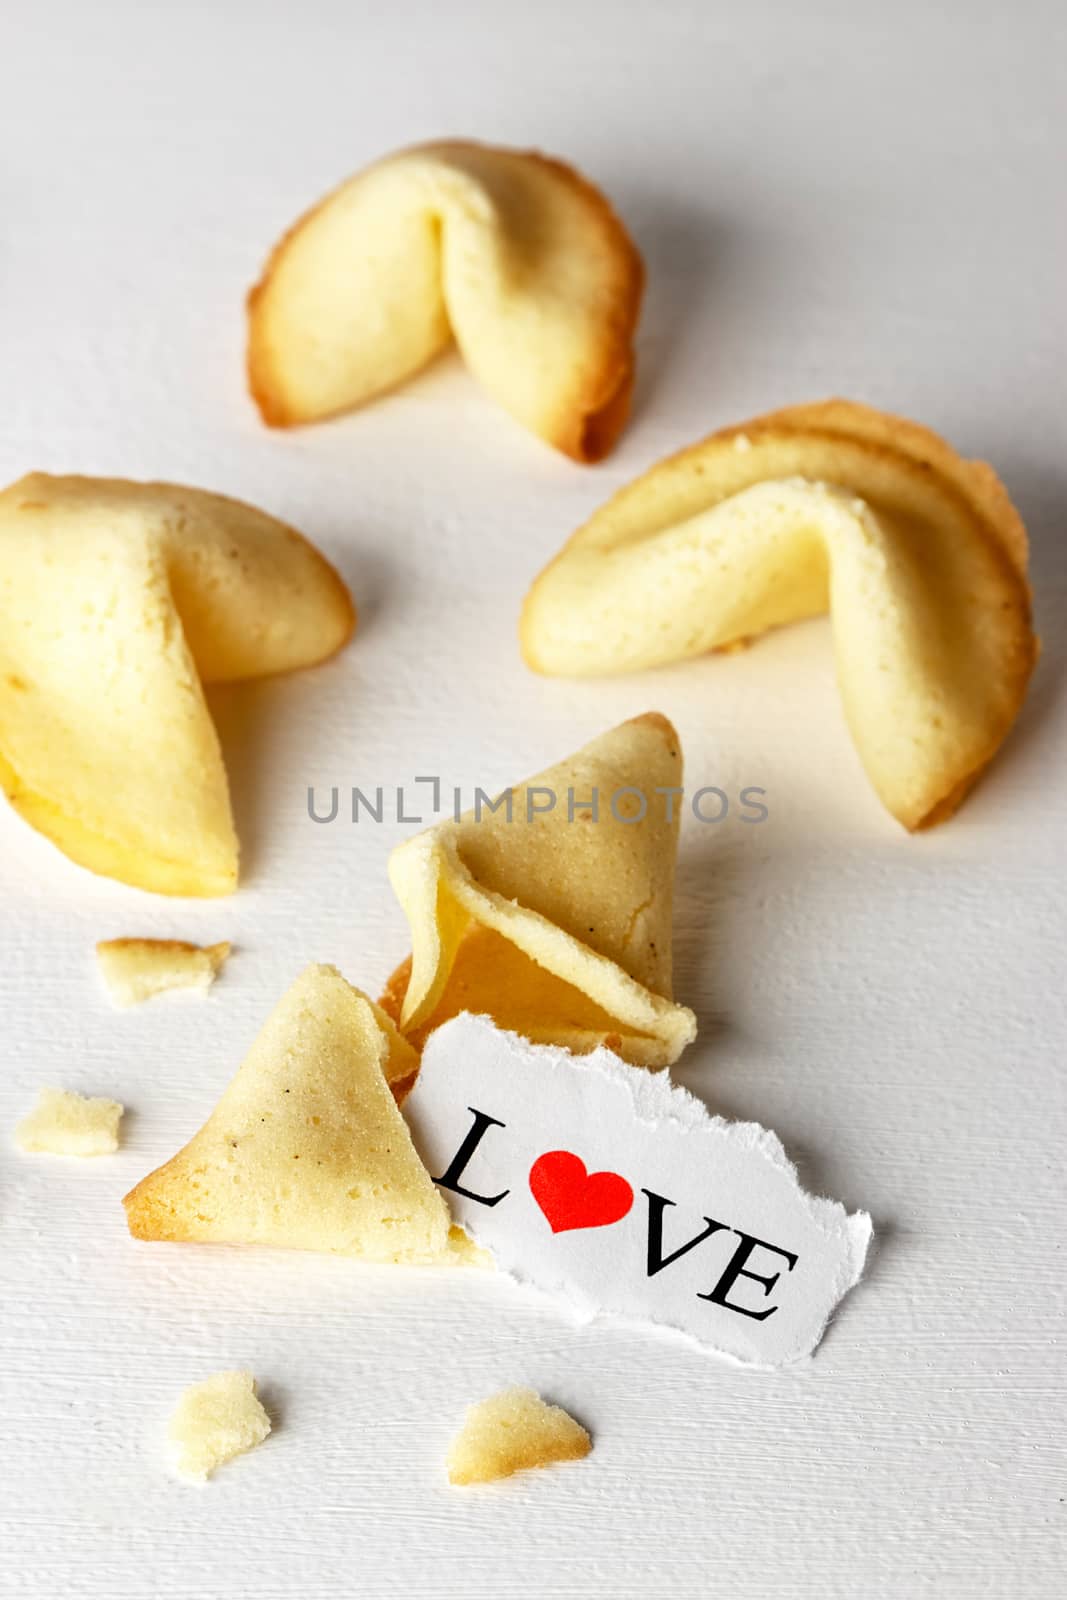 Cookies shaped like tortellini with the word love written on a paper.Vertical image.